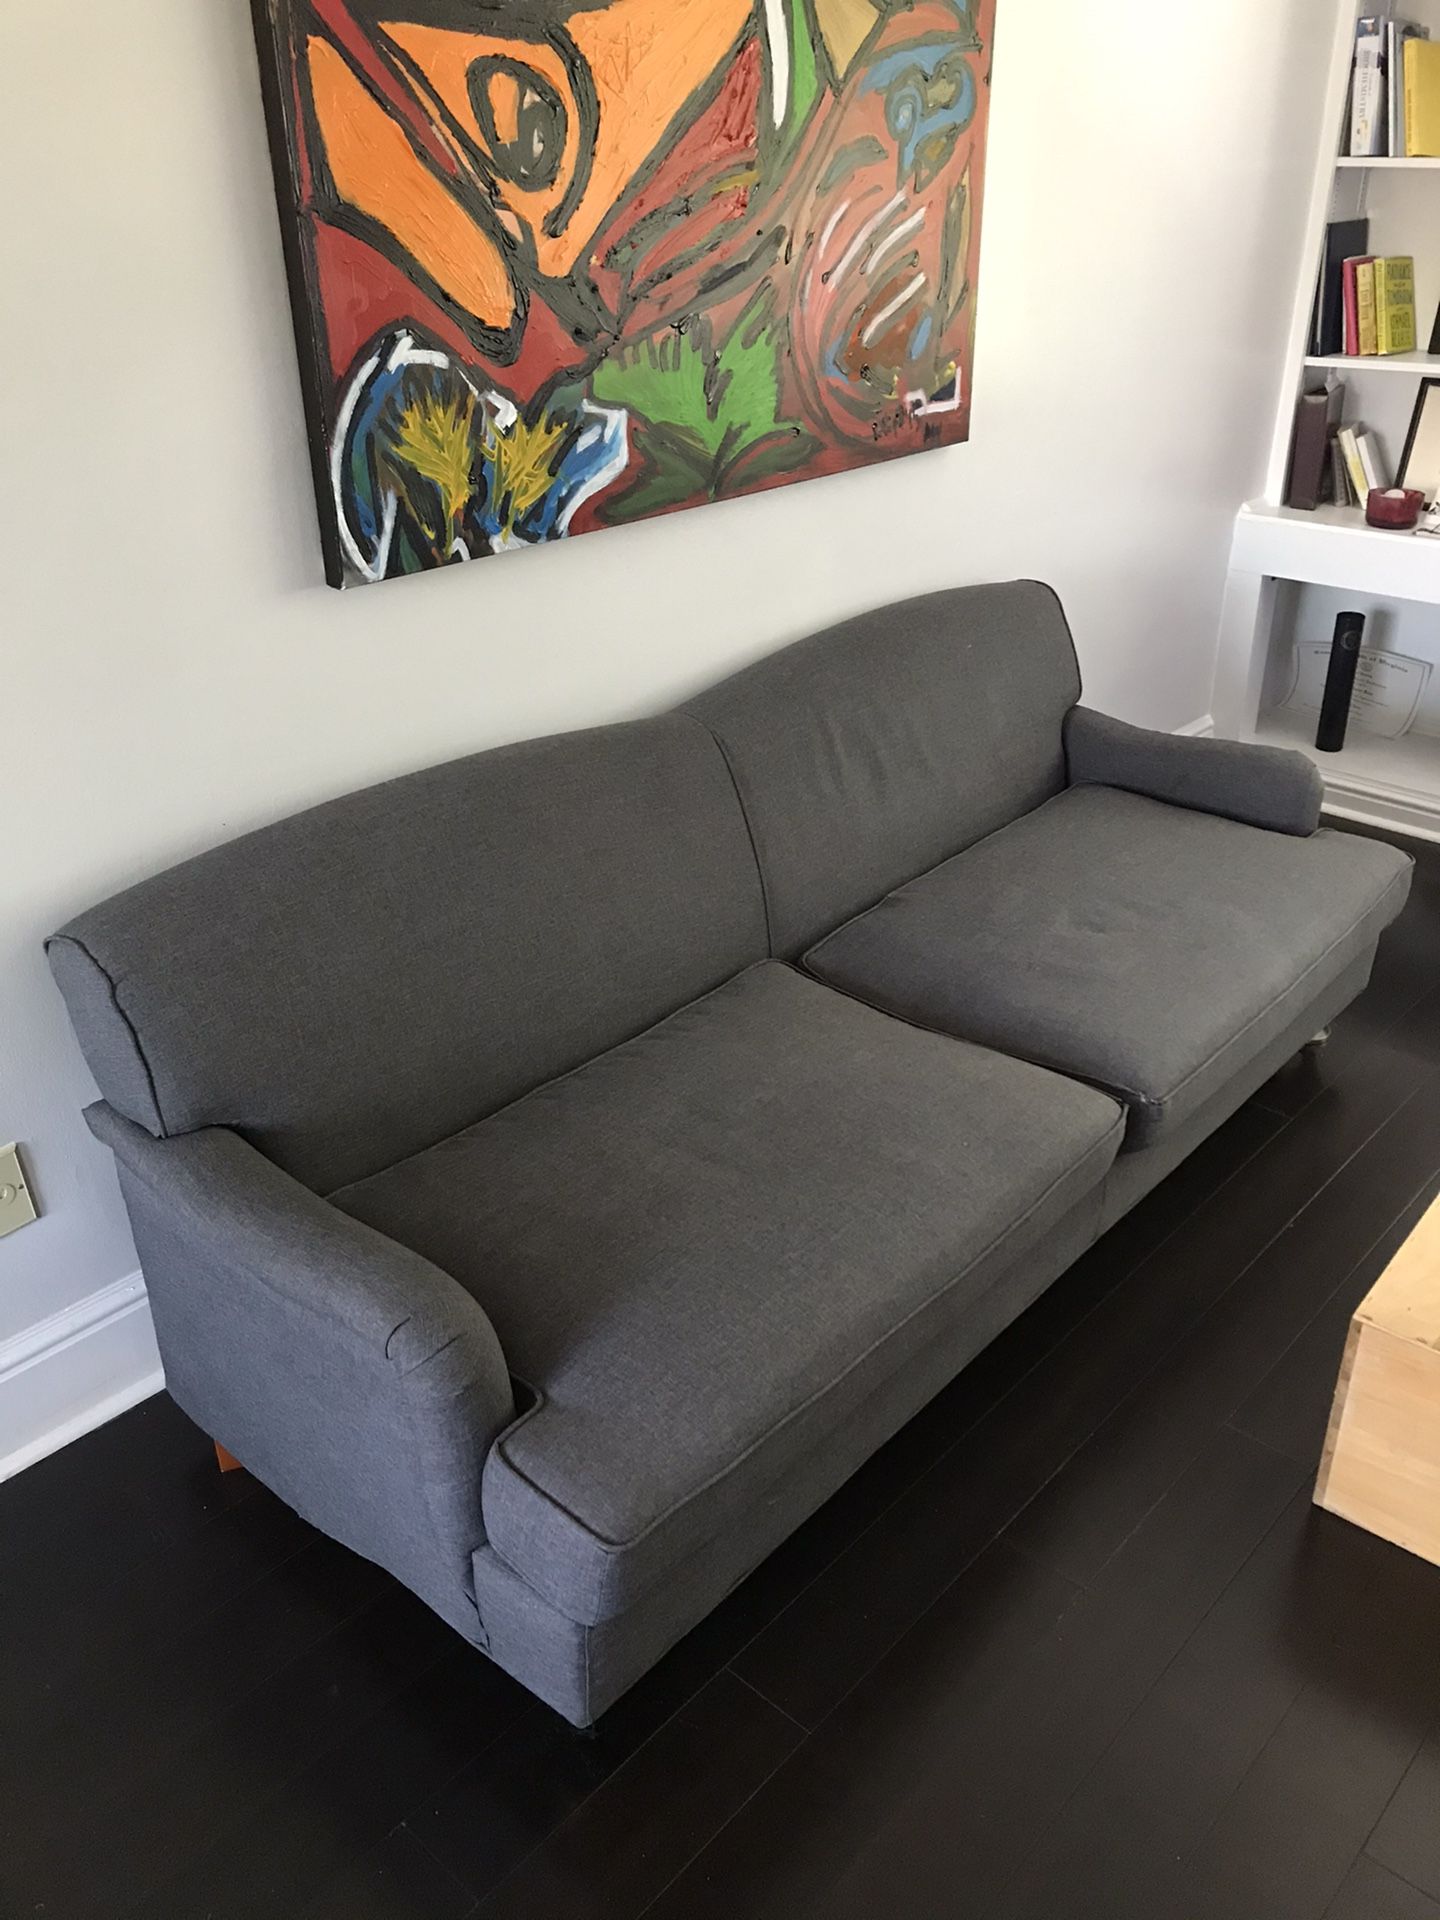 Furniture. Couch